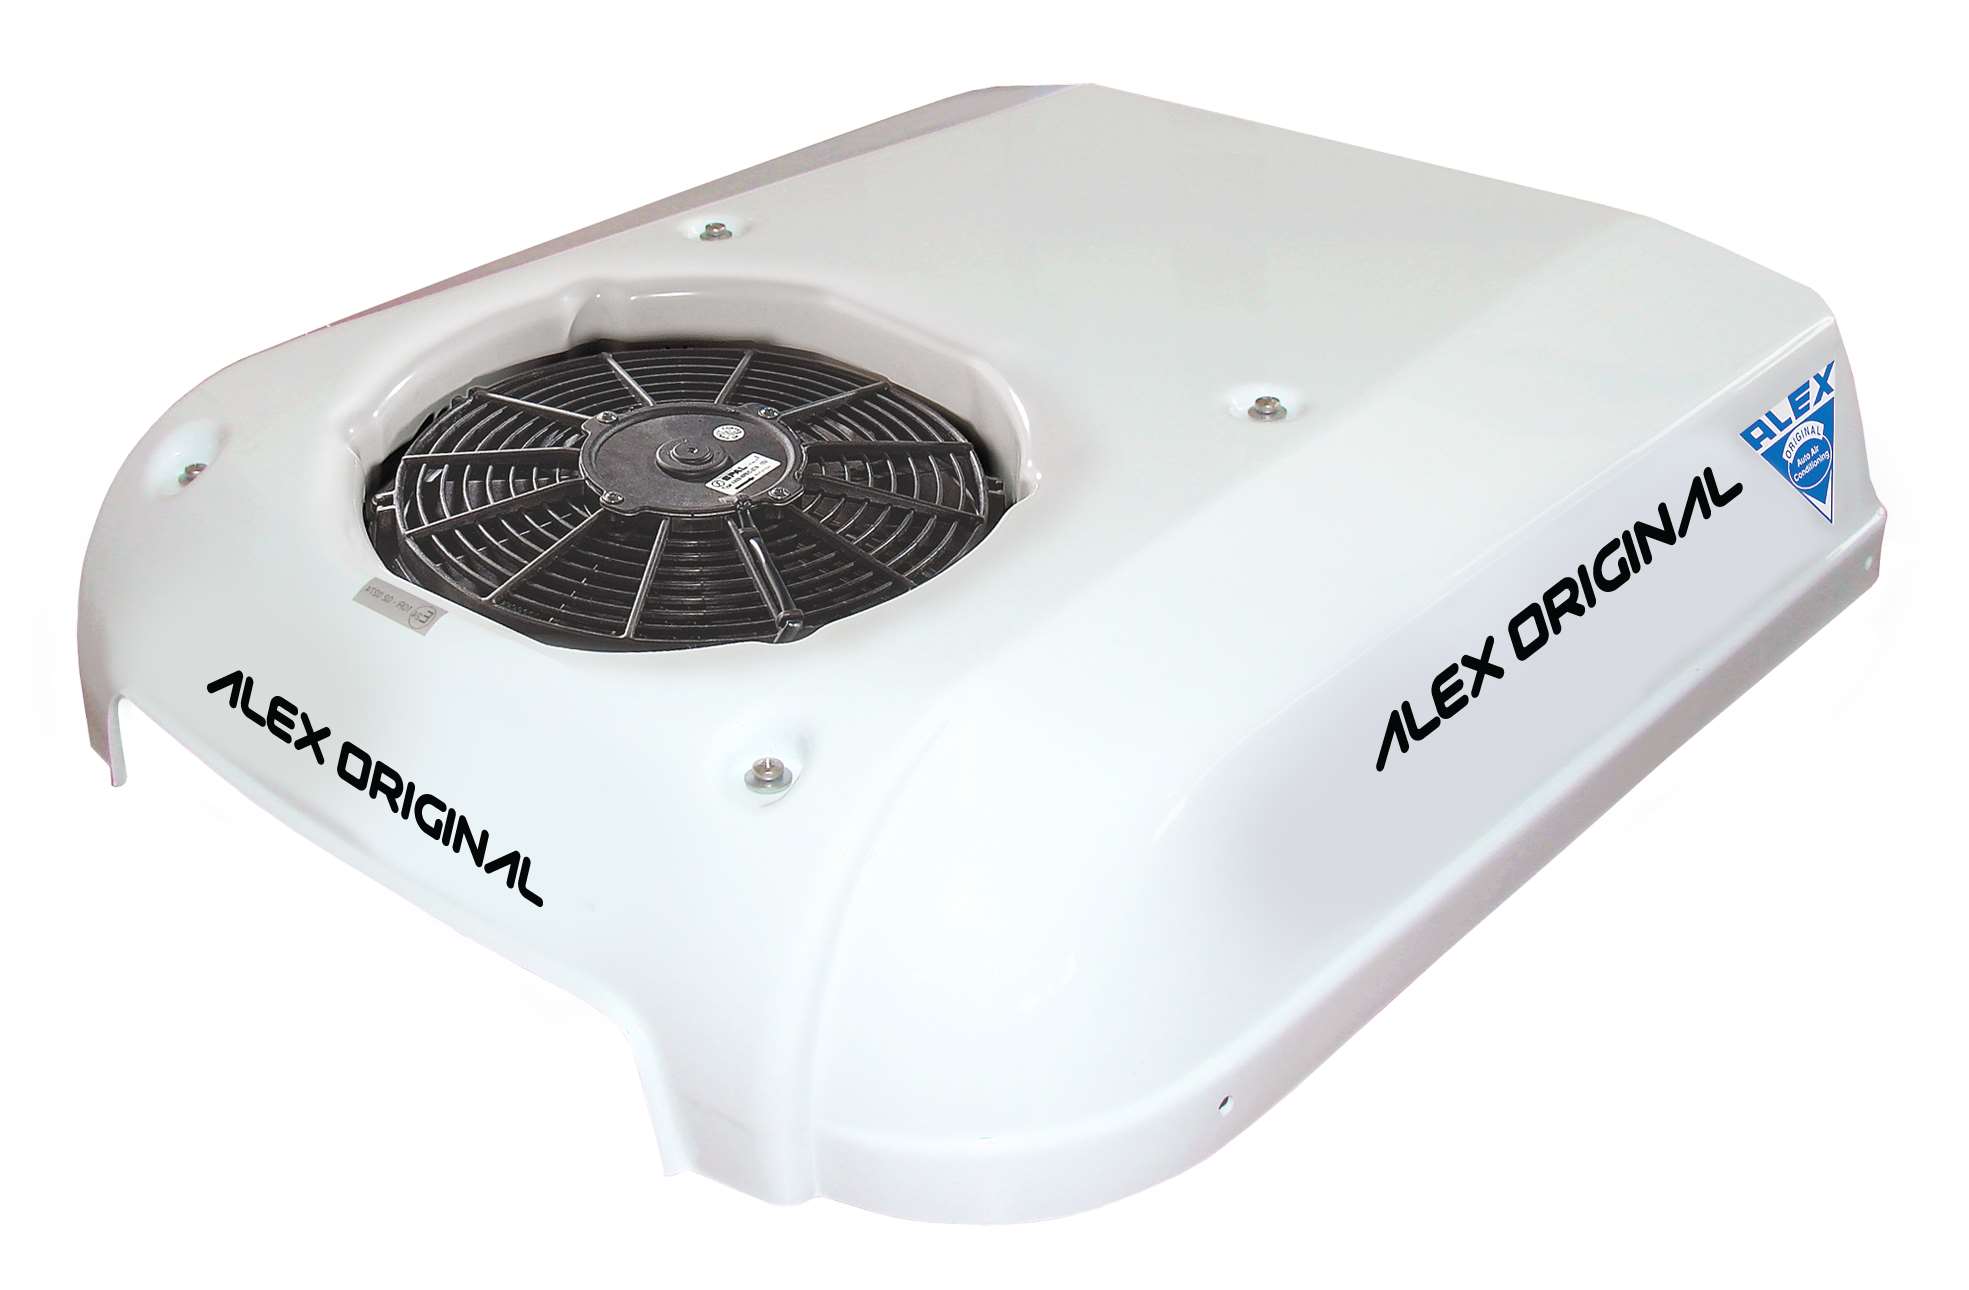 TA 0910 (3,5kW) roof air conditioner